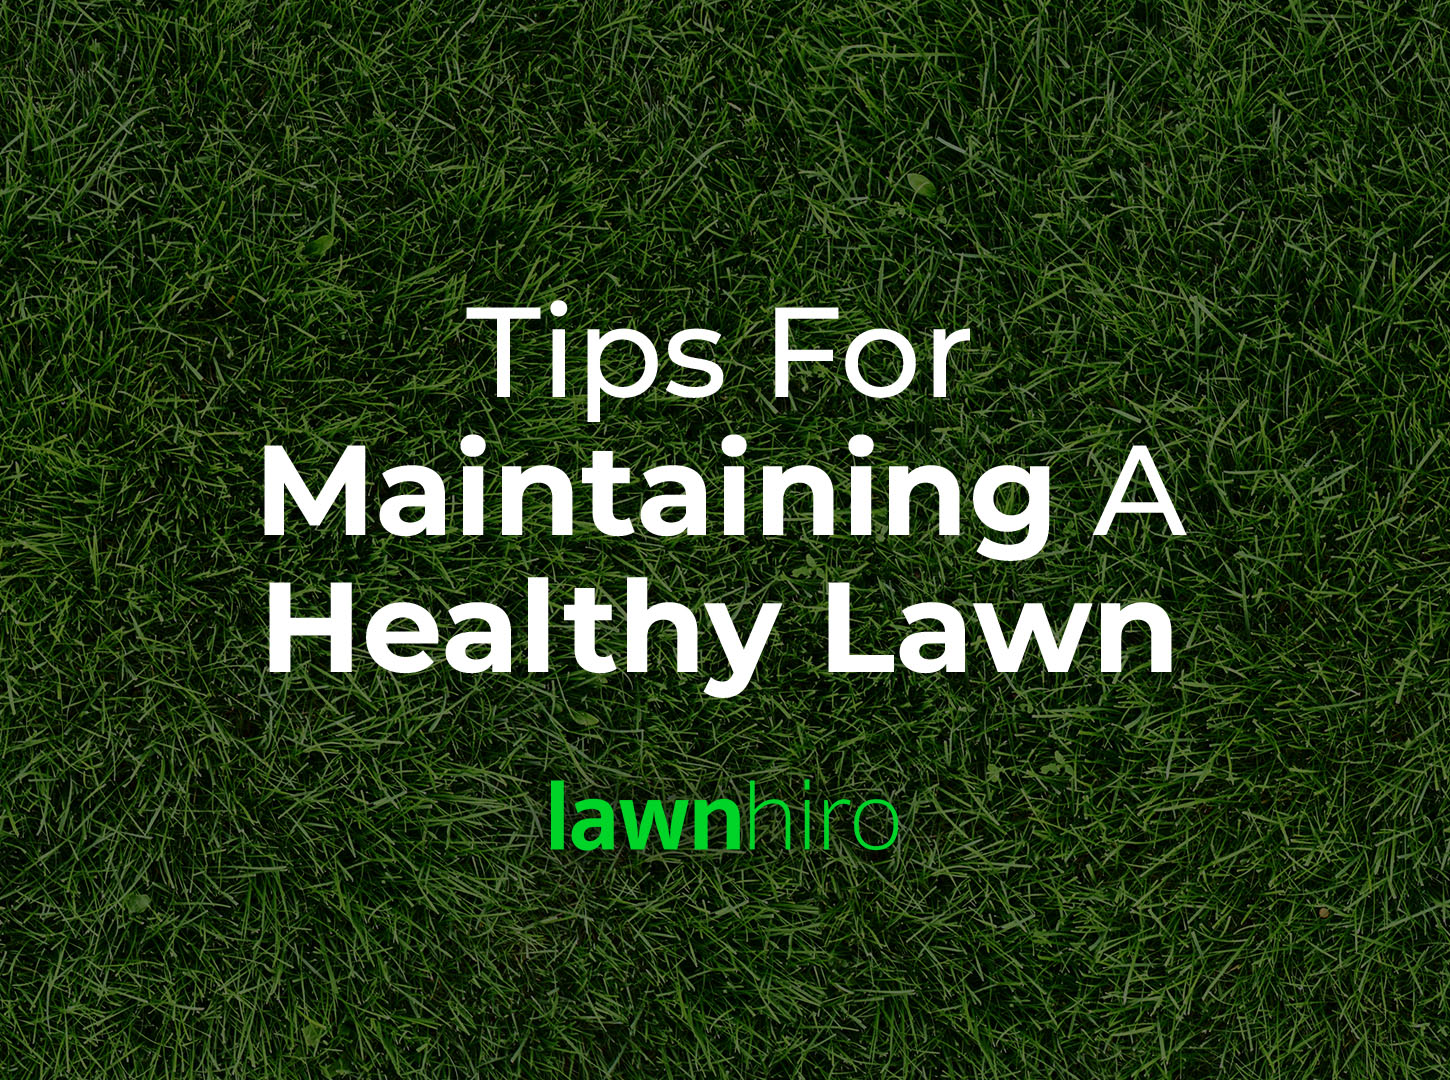 Tips for Lawn Care